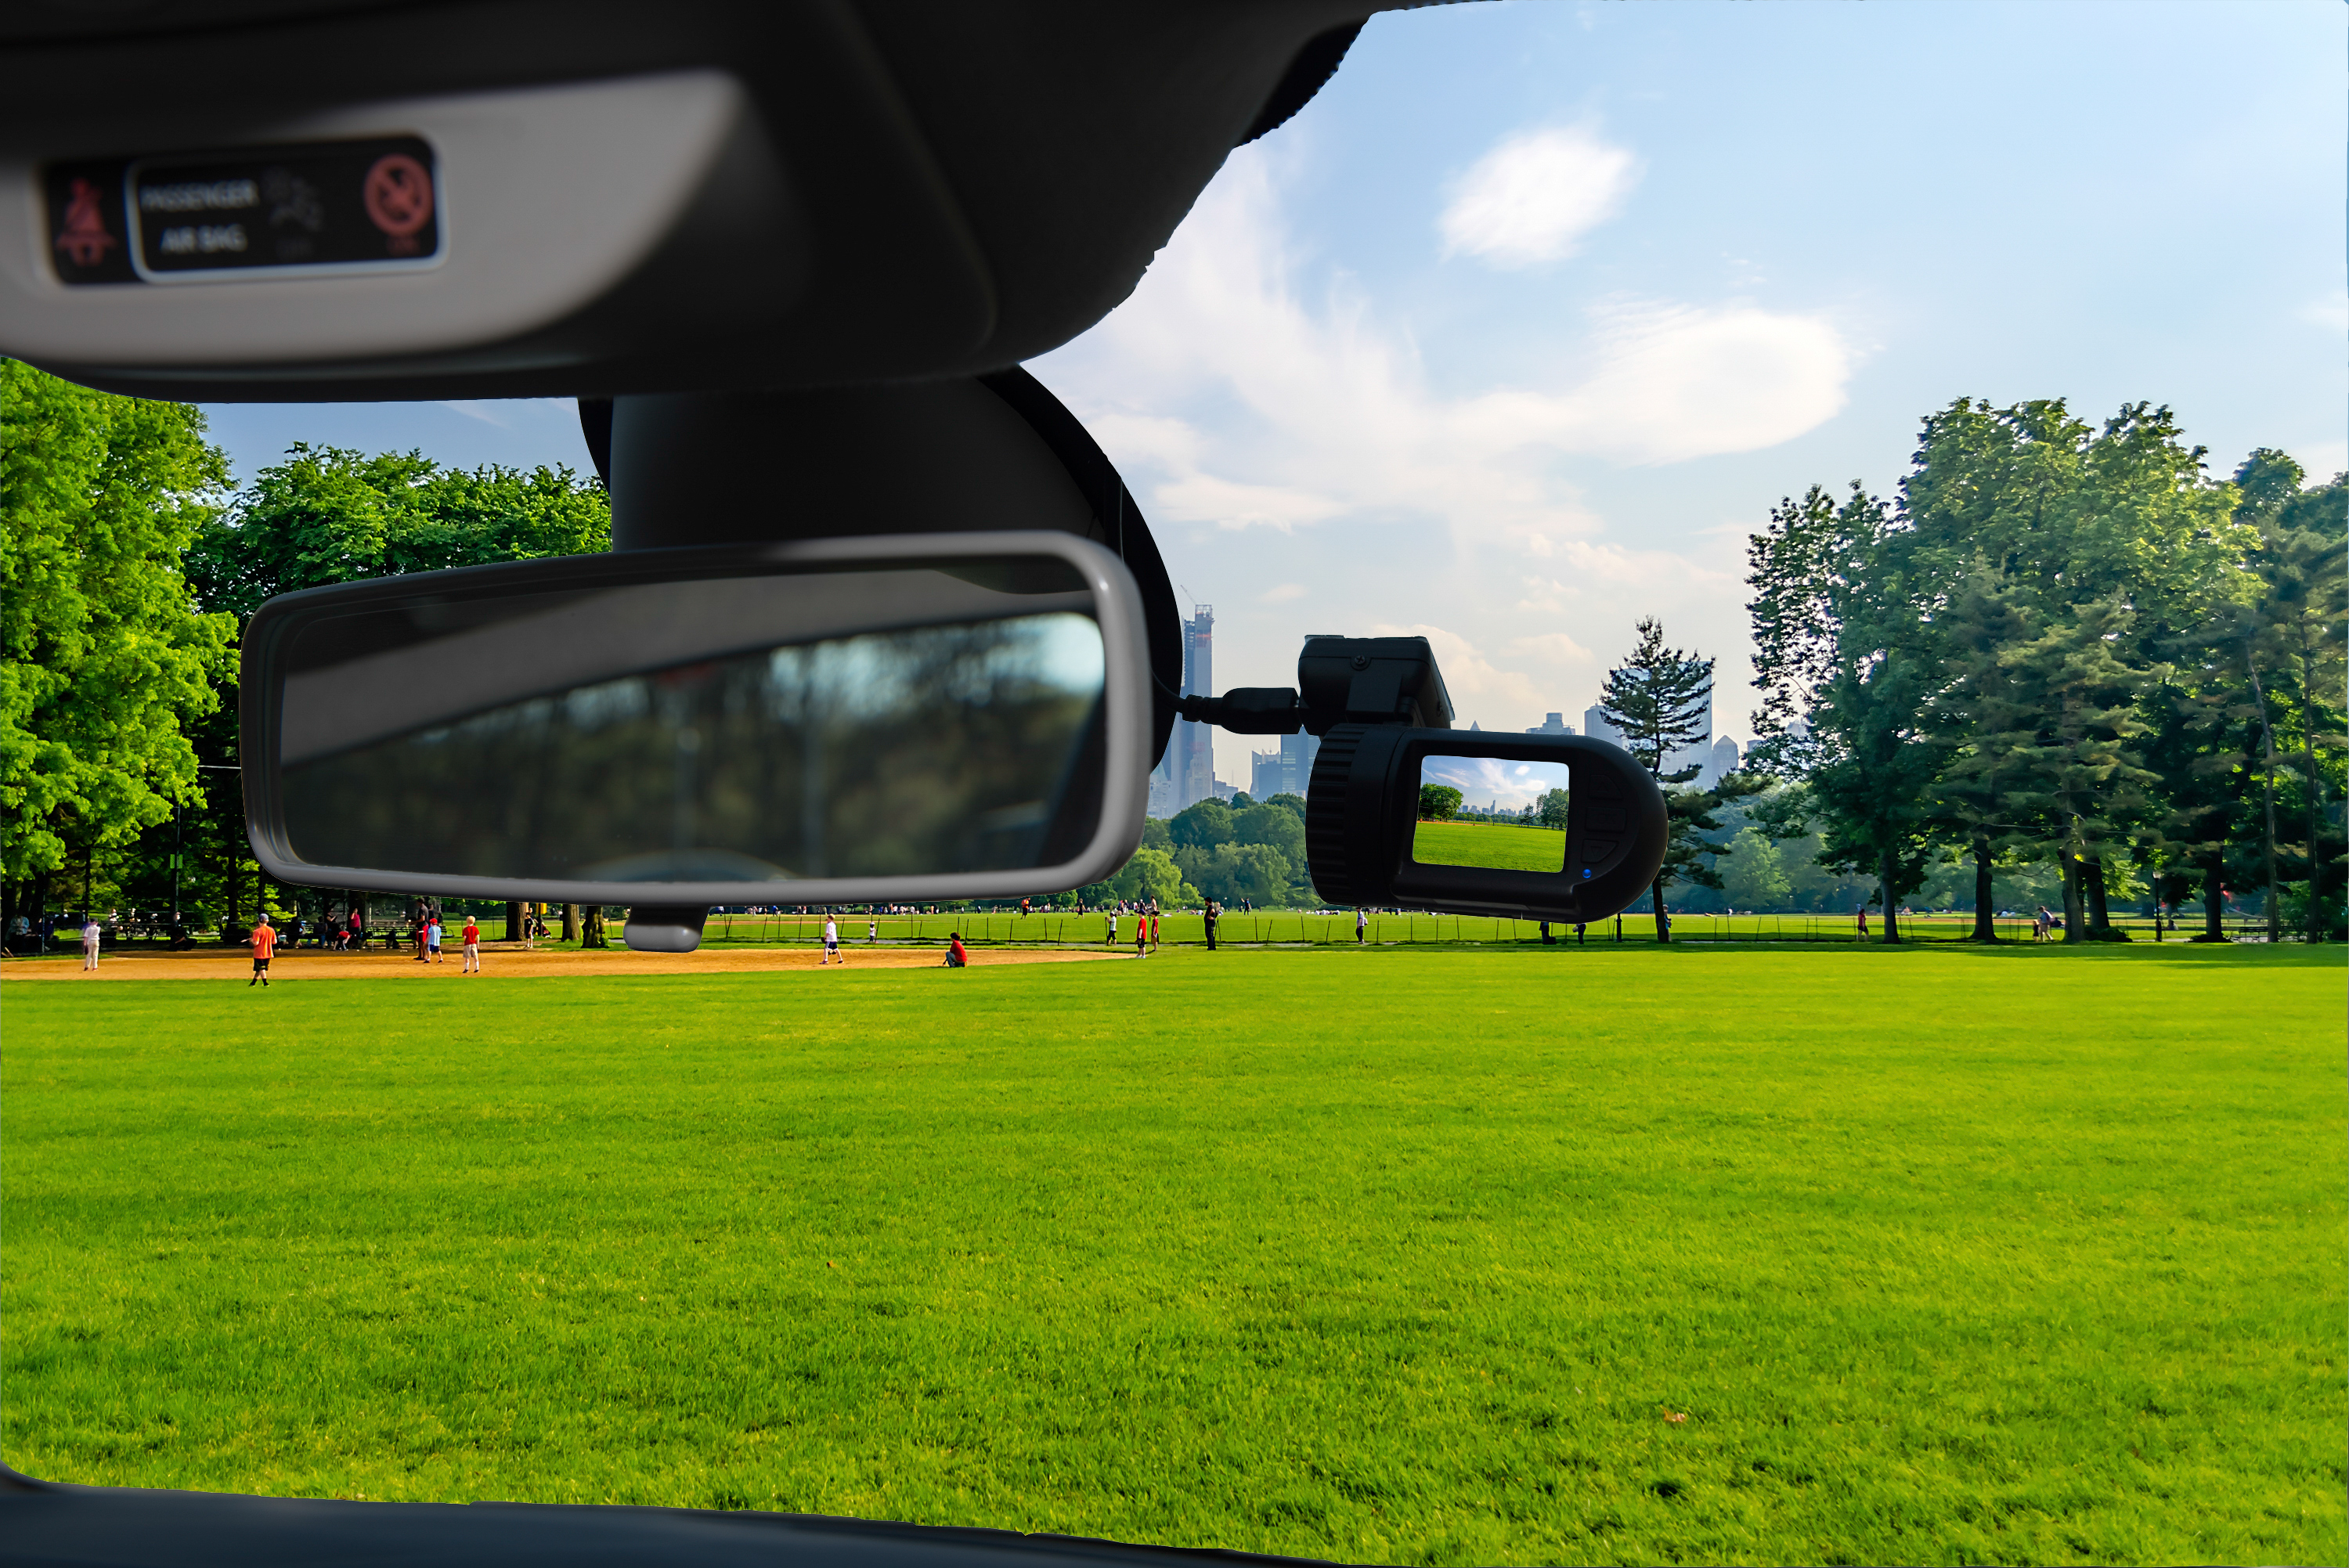 A dashcam car camera installed on a windshield | Source: Getty Images